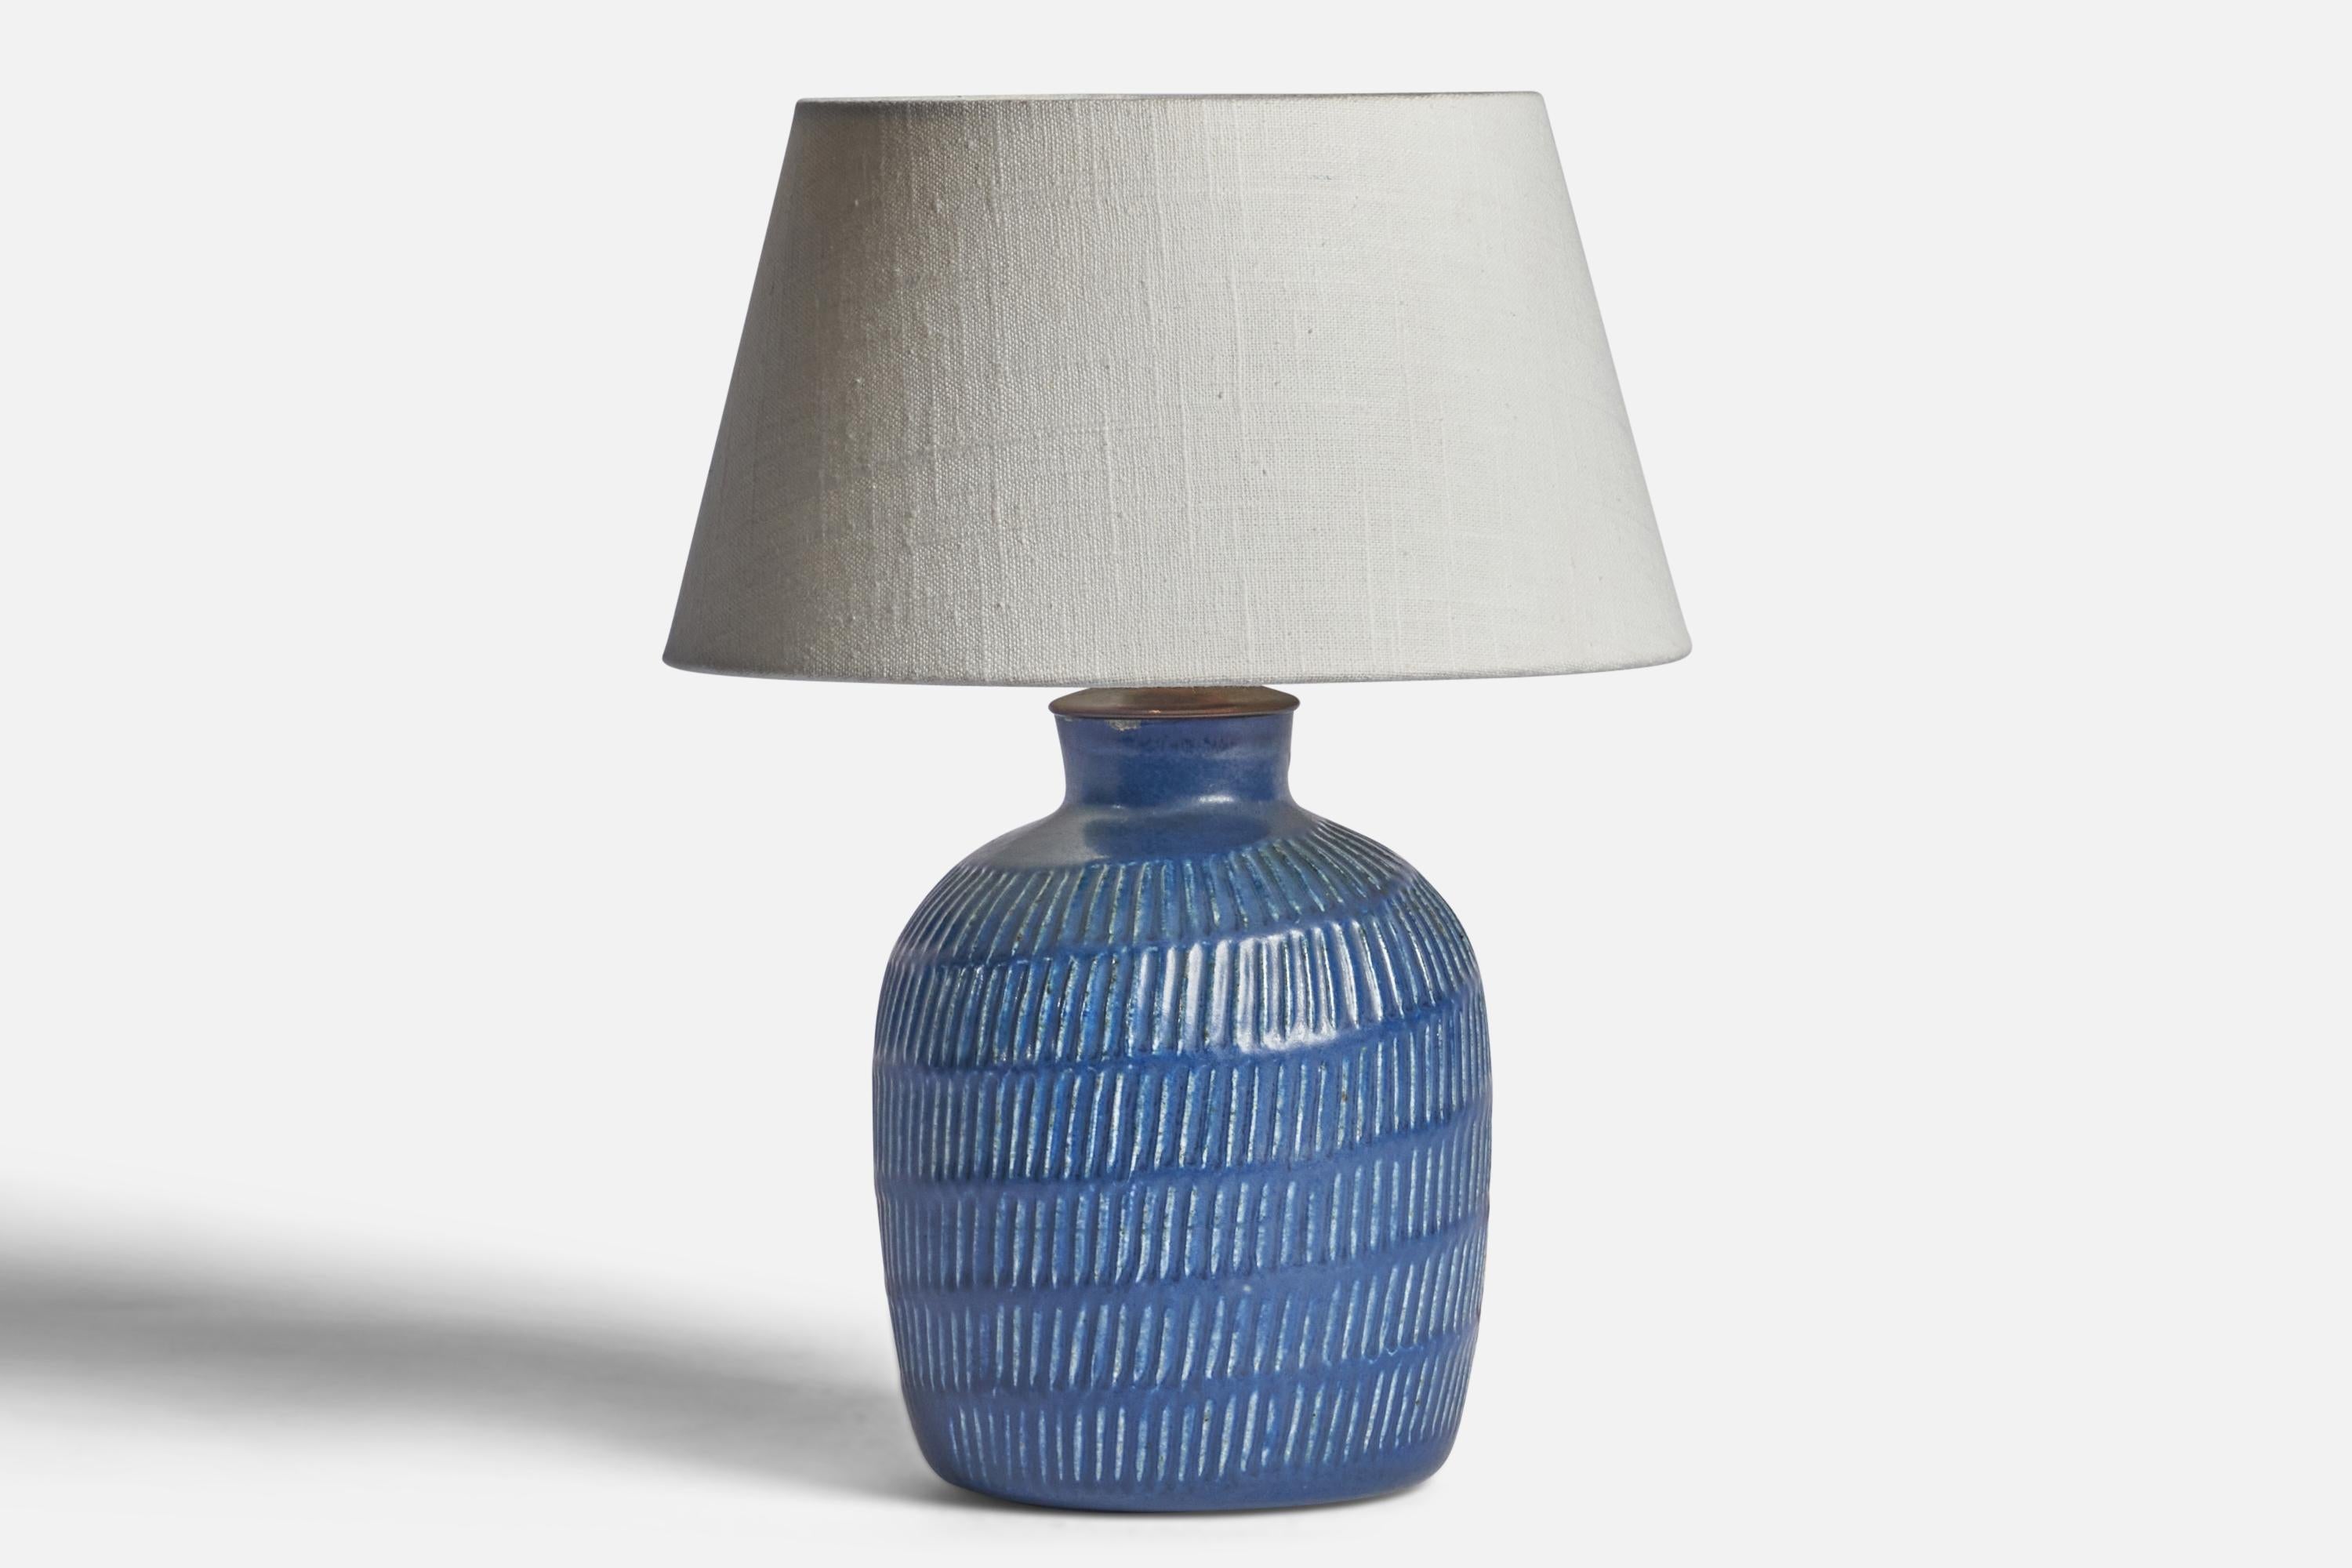 
A blue-glazed incised stoneware and brass table lamp designed by Eva Staehr Nielsen and produced by Saxbo, Denmark, 1950s.
Dimensions of Lamp (inches): 10.5” H x 5.75” Diameter
Dimensions of Shade (inches): 7” Top Diameter x 10” Bottom Diameter x